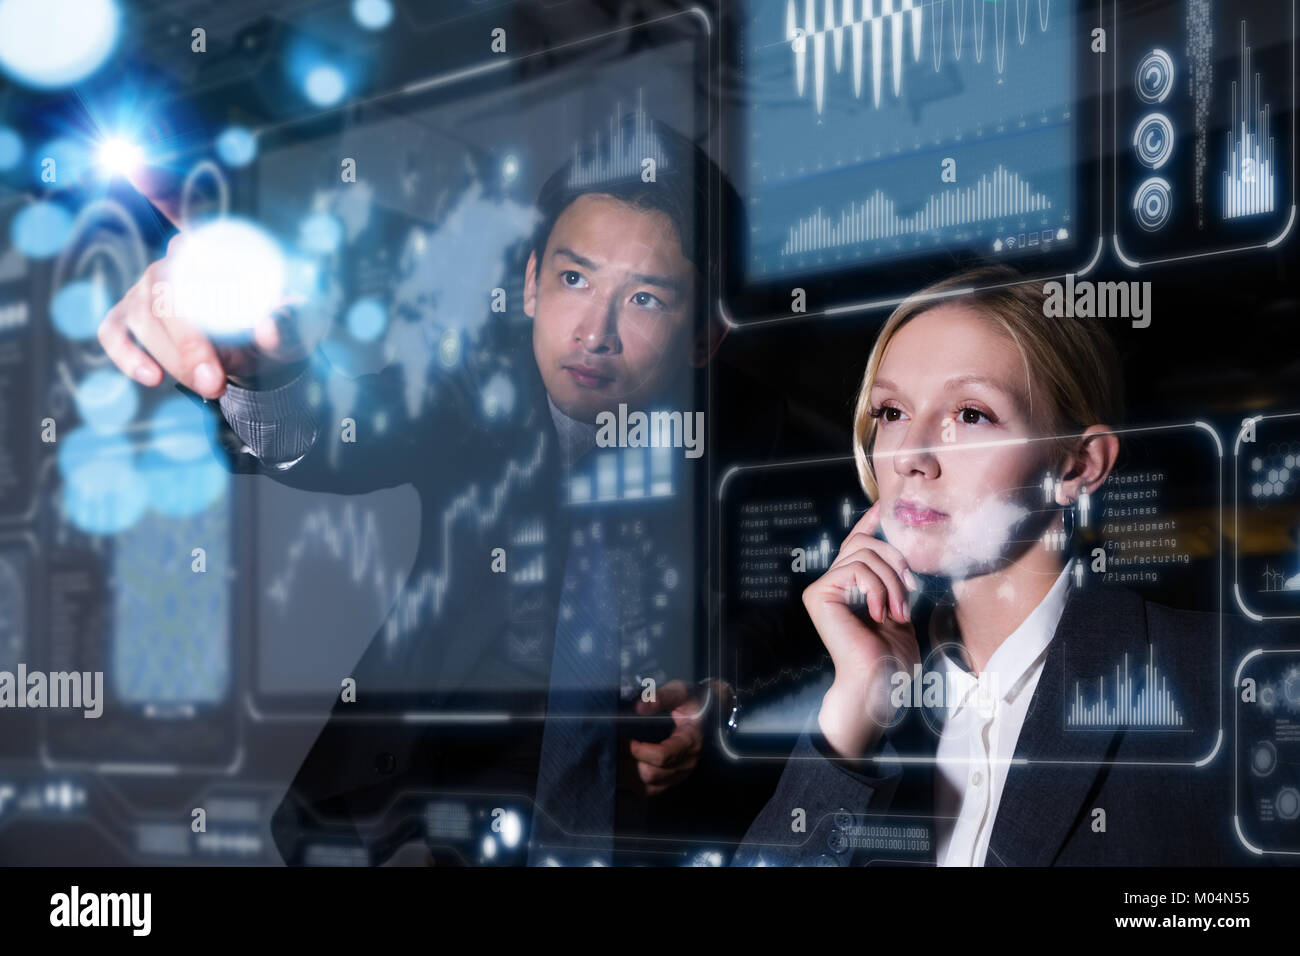 Two business persons in front of futuristic display. Social networking concept. Stock Photo